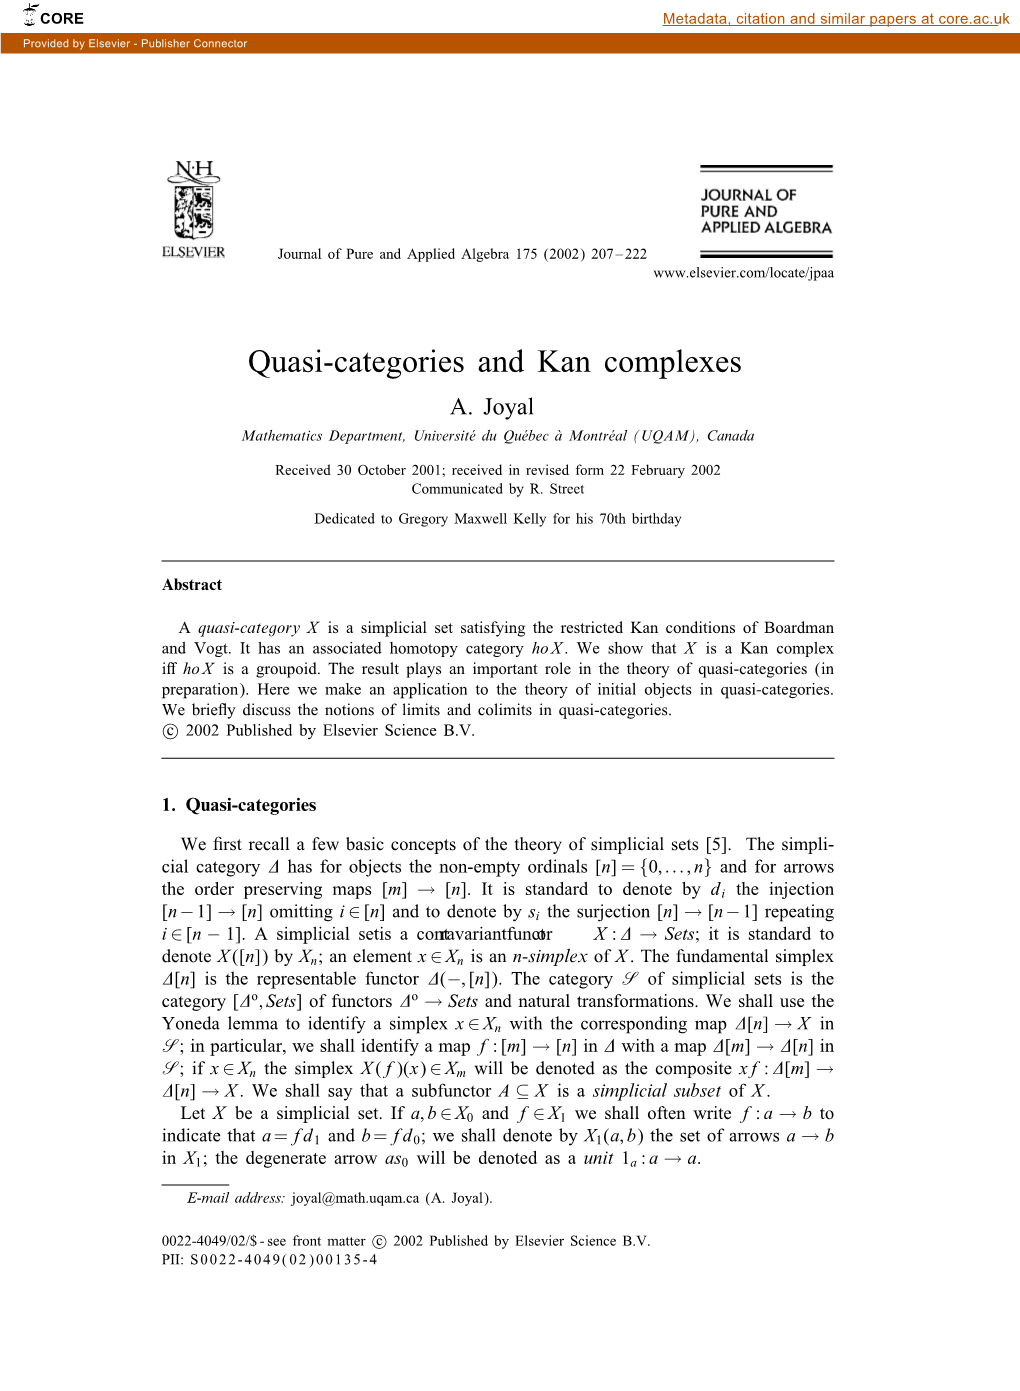 Quasi-Categories and Kan Complexes A